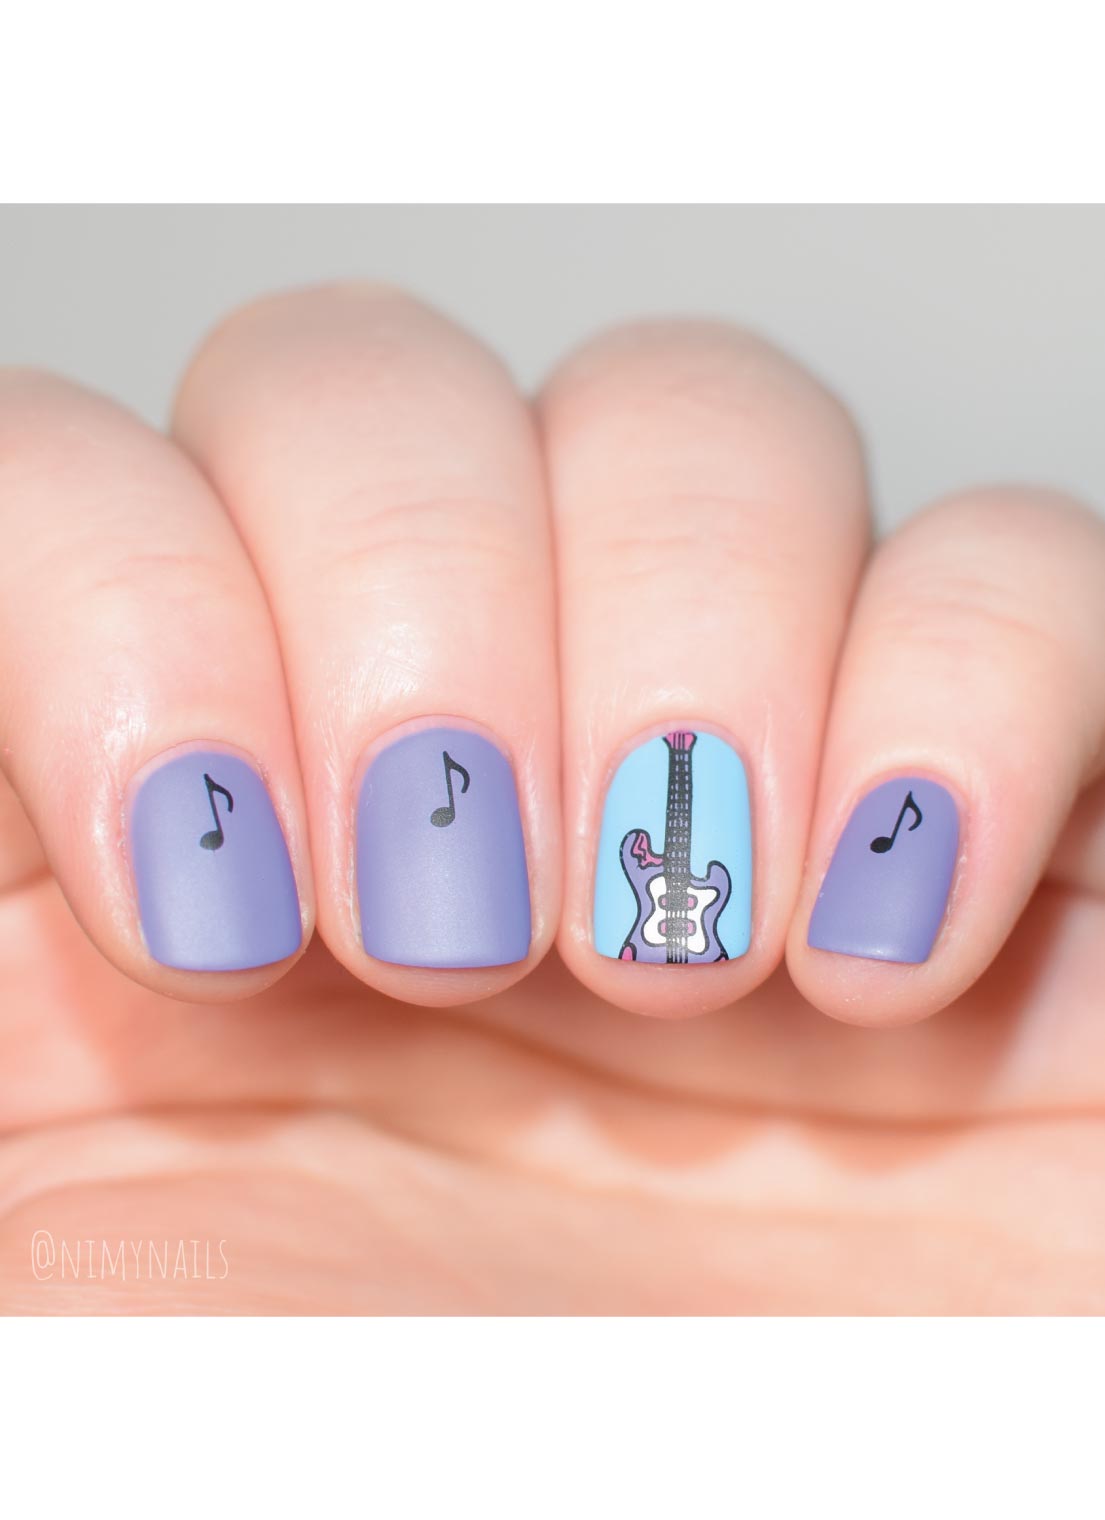 10 Acrylic Nail Designs That Say “Yeah, I Gave Up Trying to Play Guitar